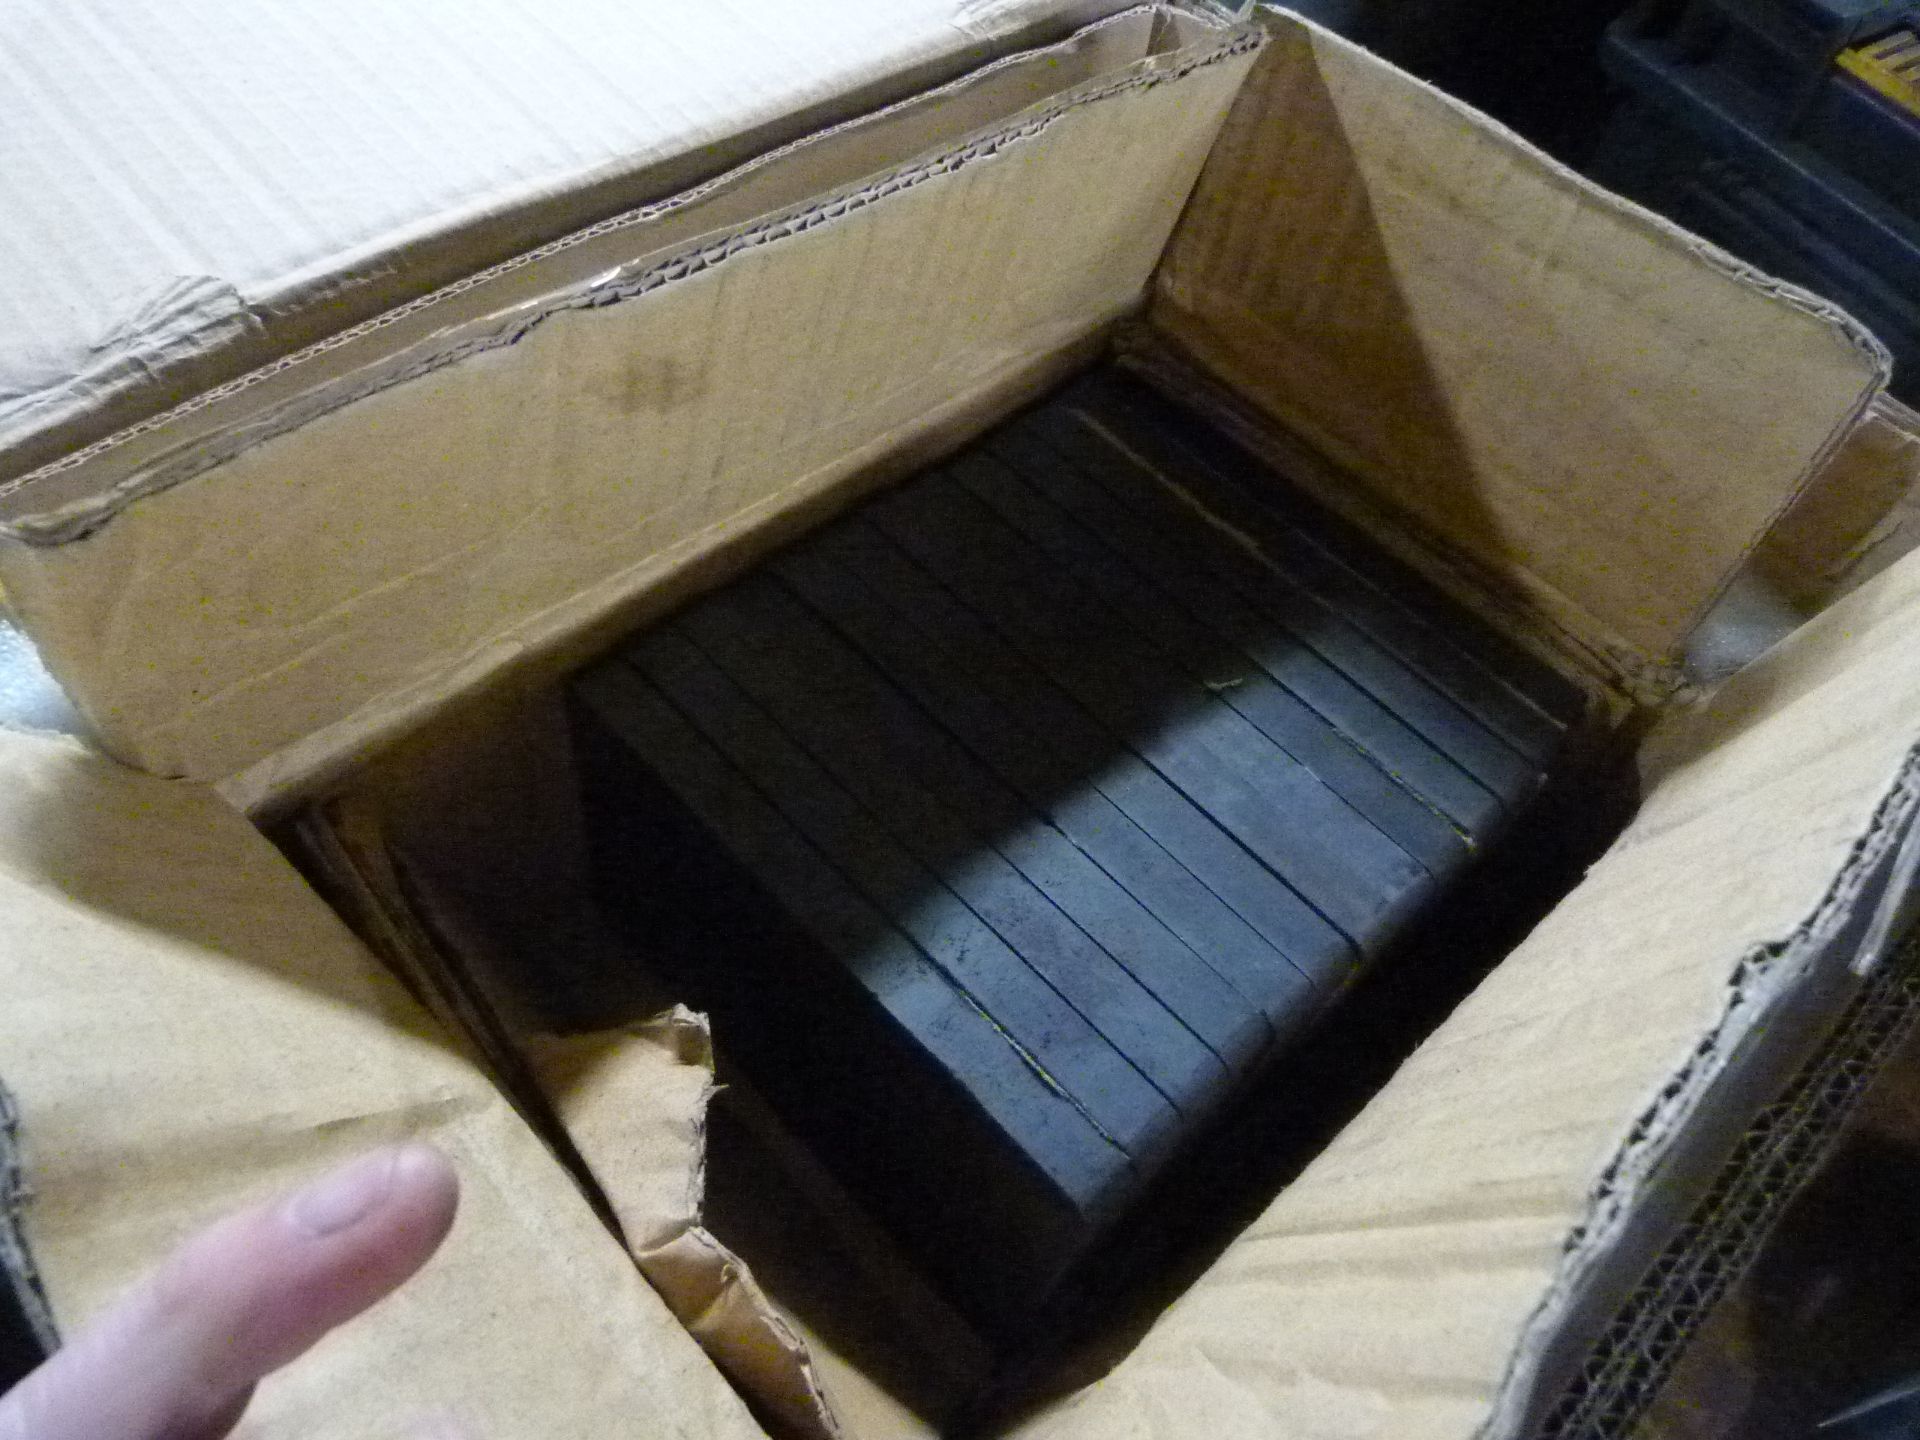 *Two Boxes of 150x100x12.7mm Magnets